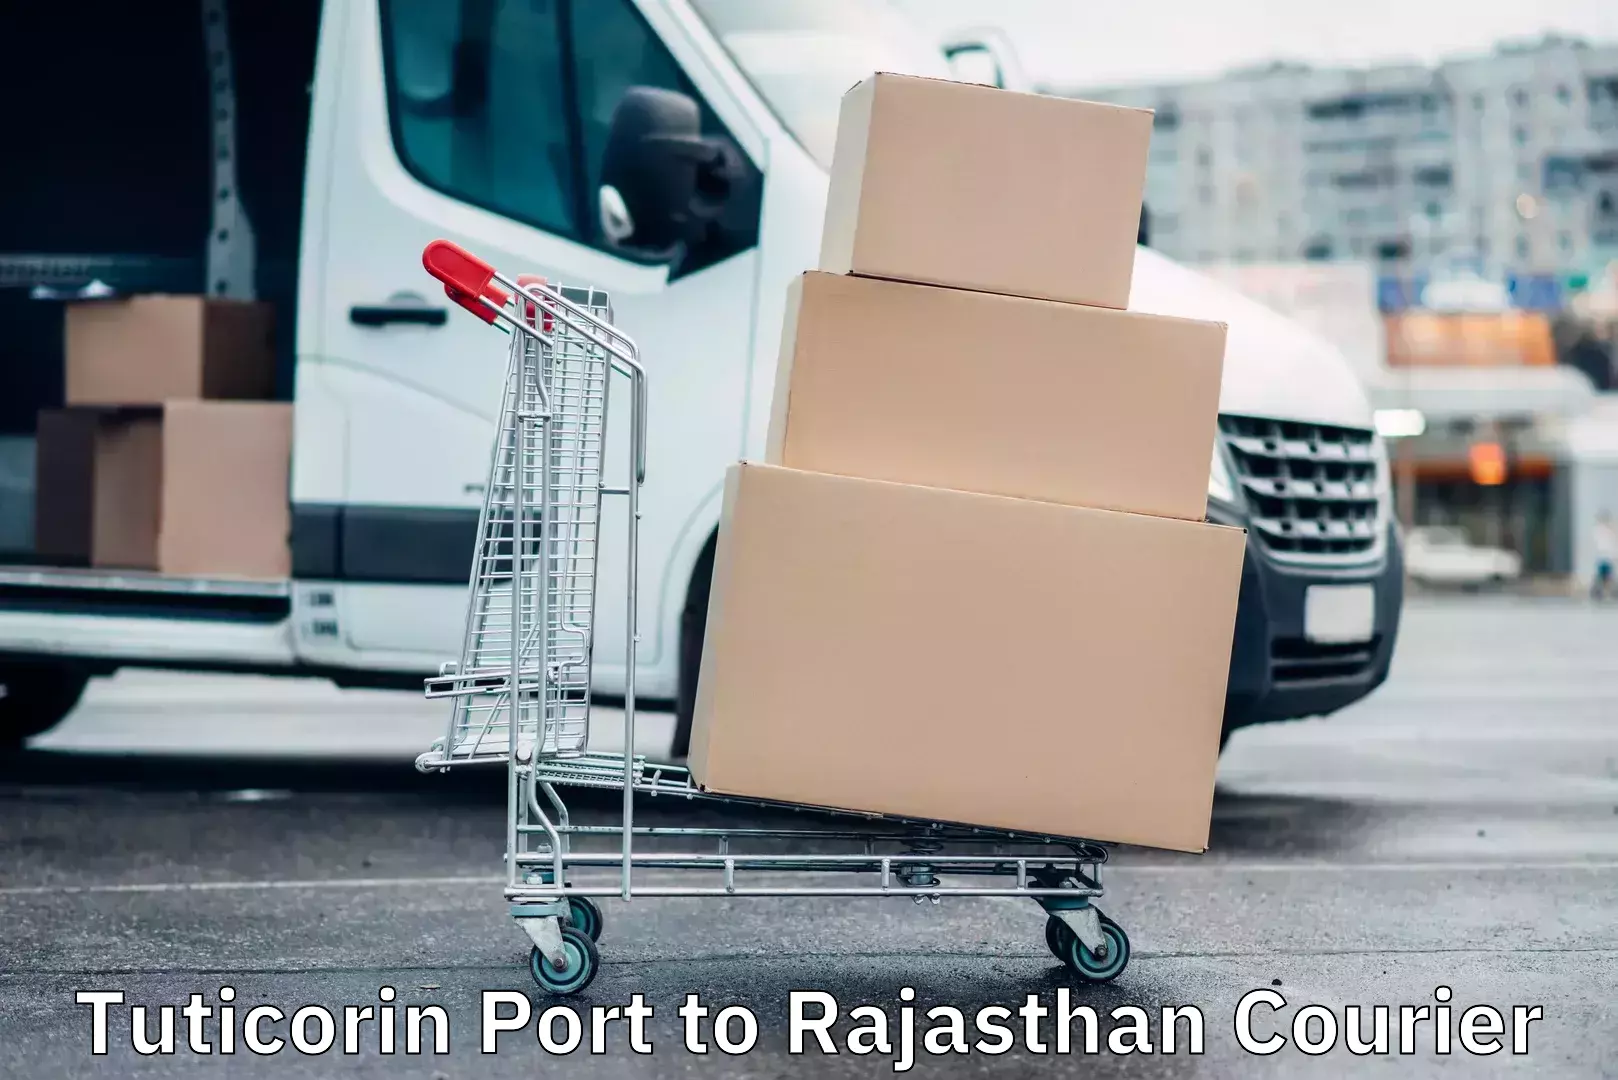 Remote area delivery in Tuticorin Port to Rajasthan